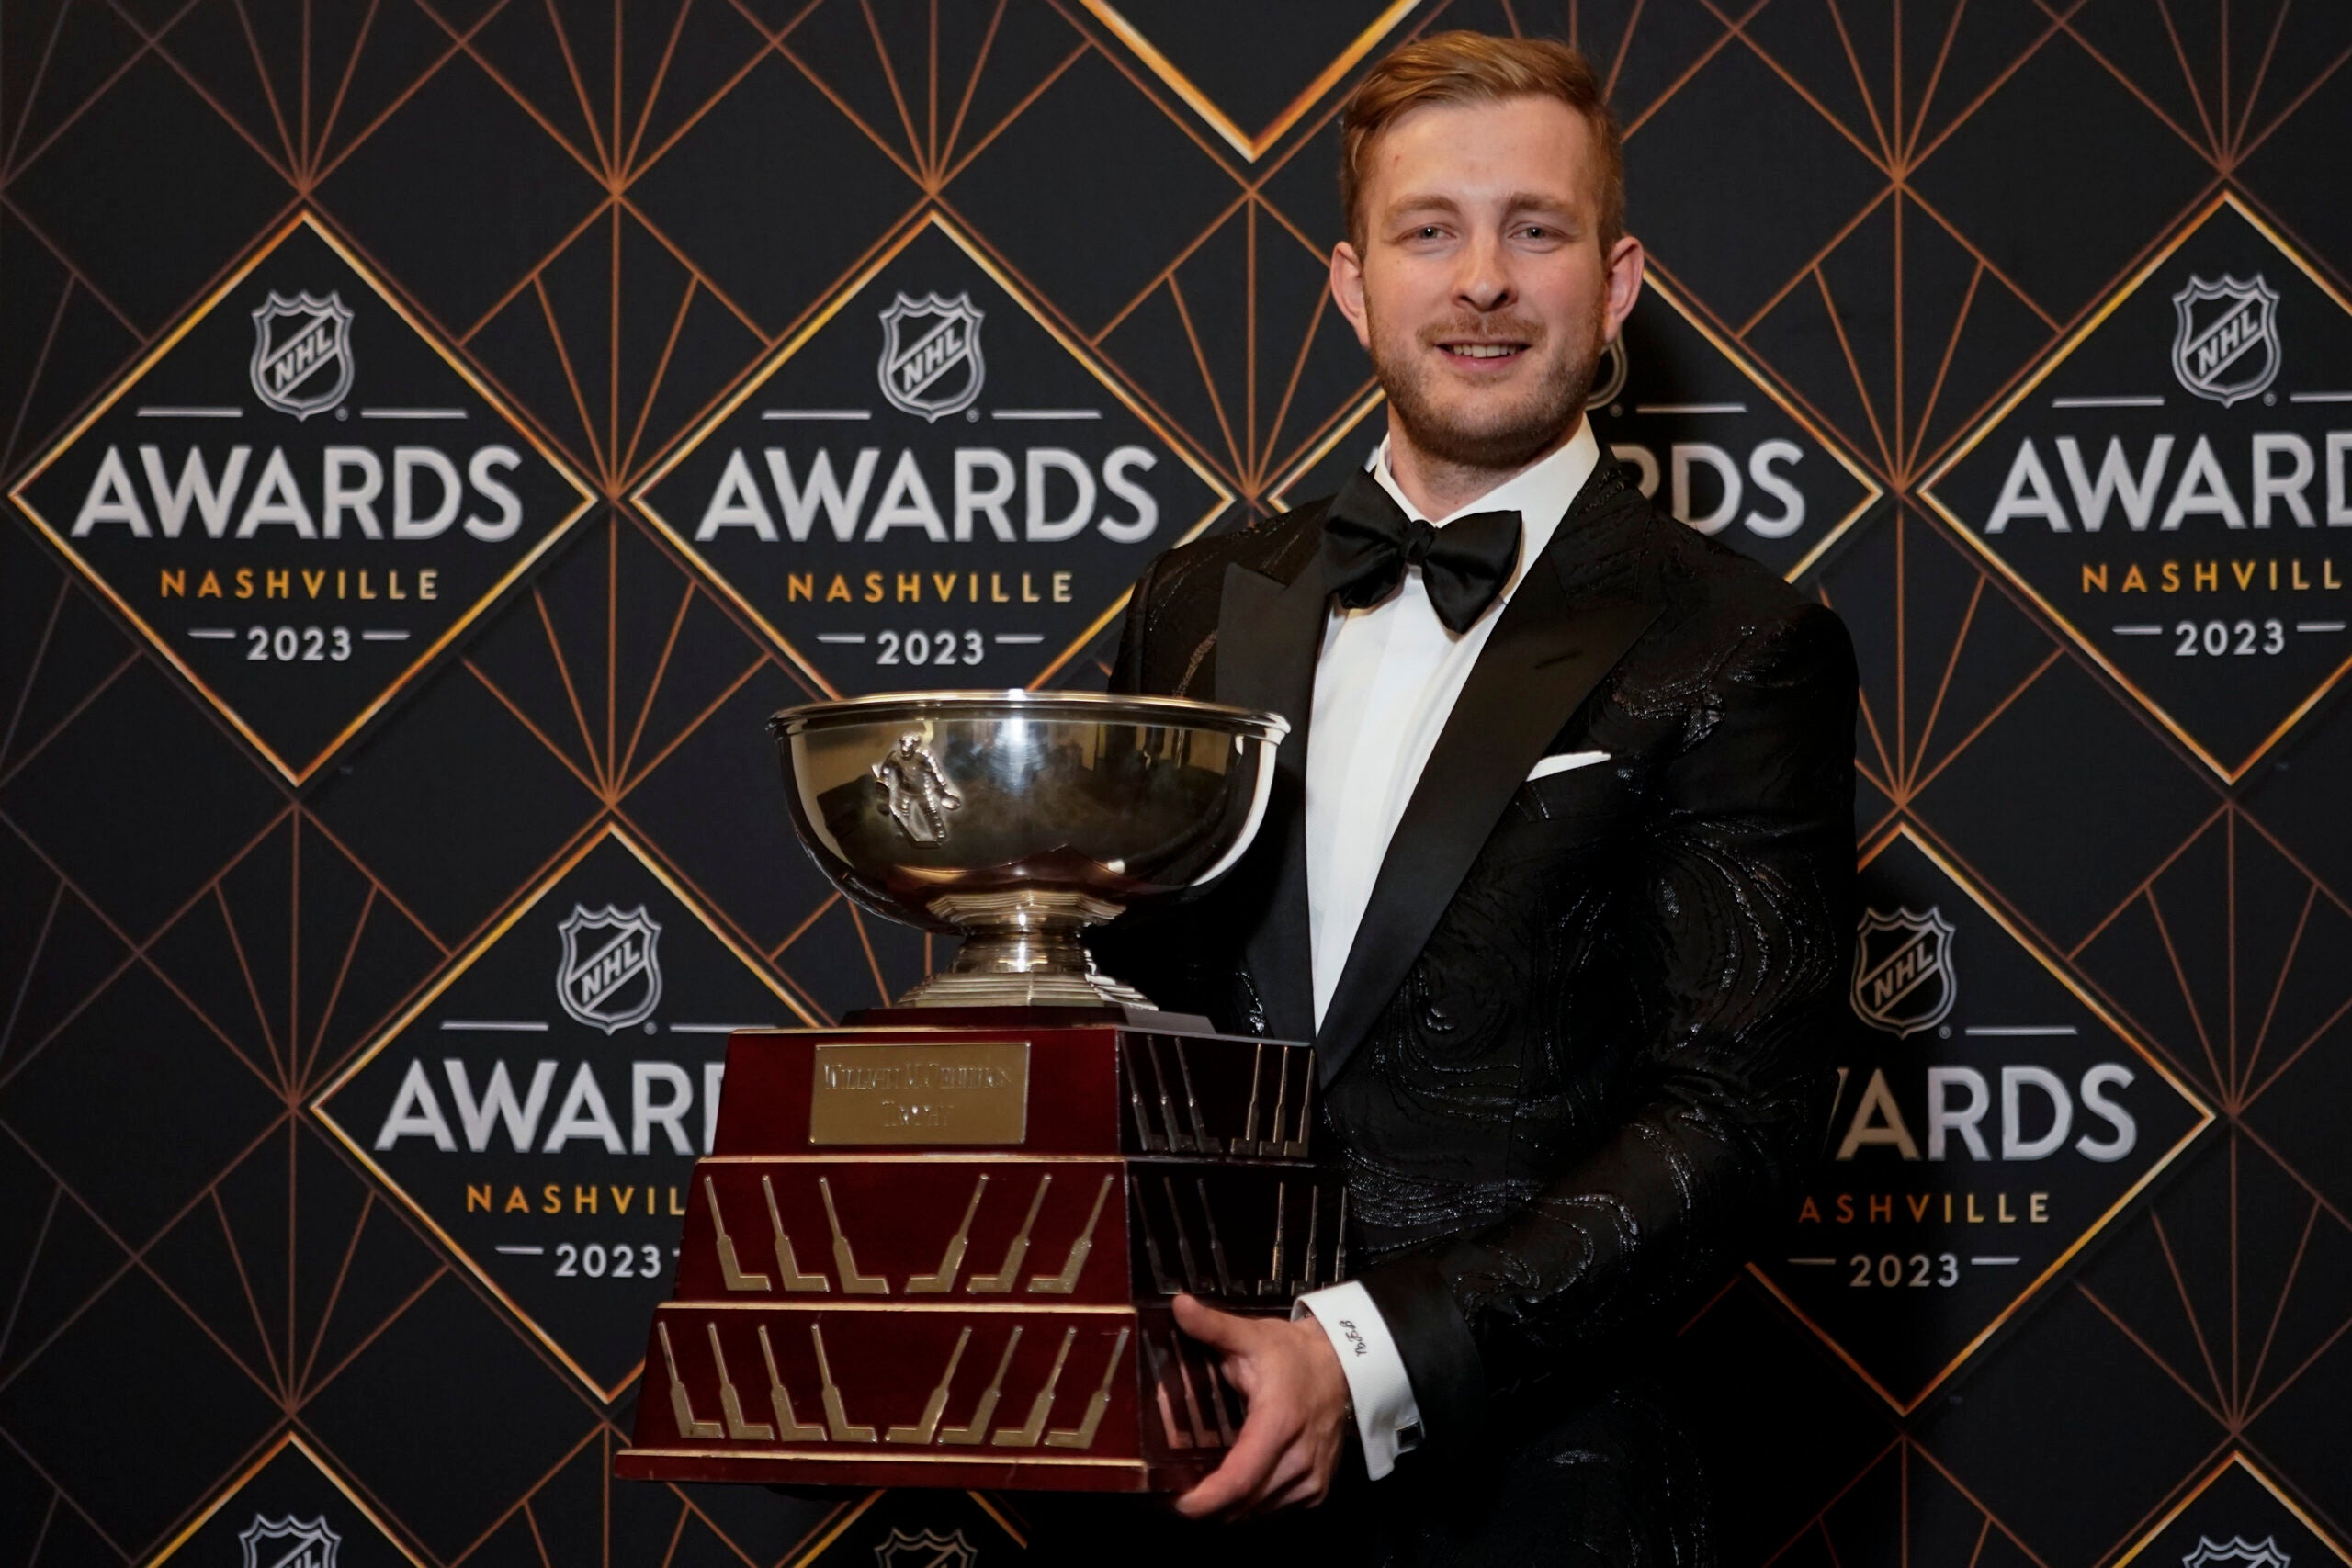 Boston Bruins hockey player Linus Ullmark poses after winning the William M. Jennings Trophy at the NHL Awards, Monday, June 26, 2023, in Nashville, Tenn.